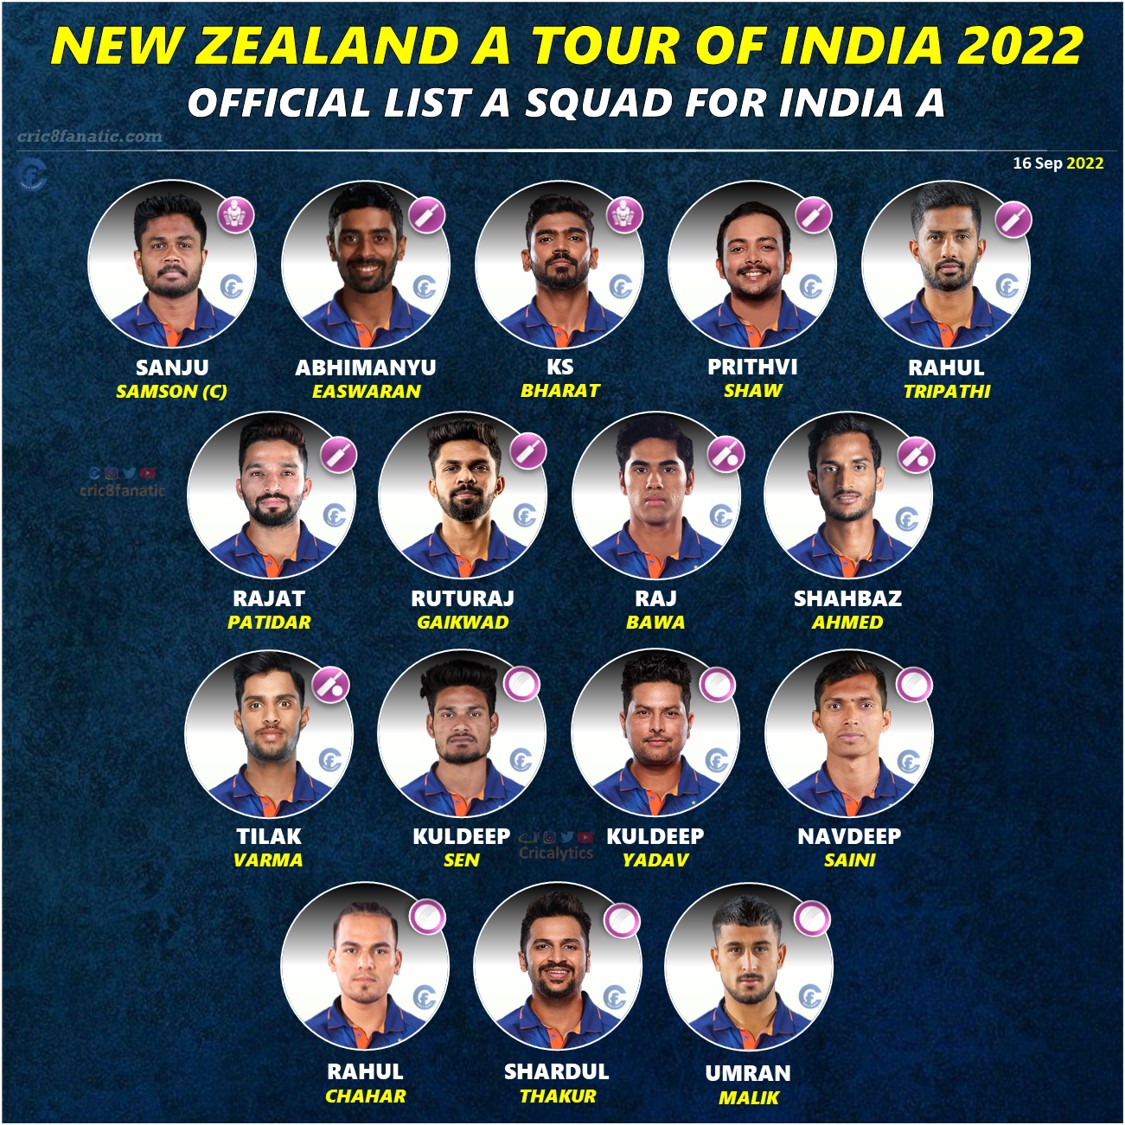 india vs new zealand official list a squad players list cric8fanatic